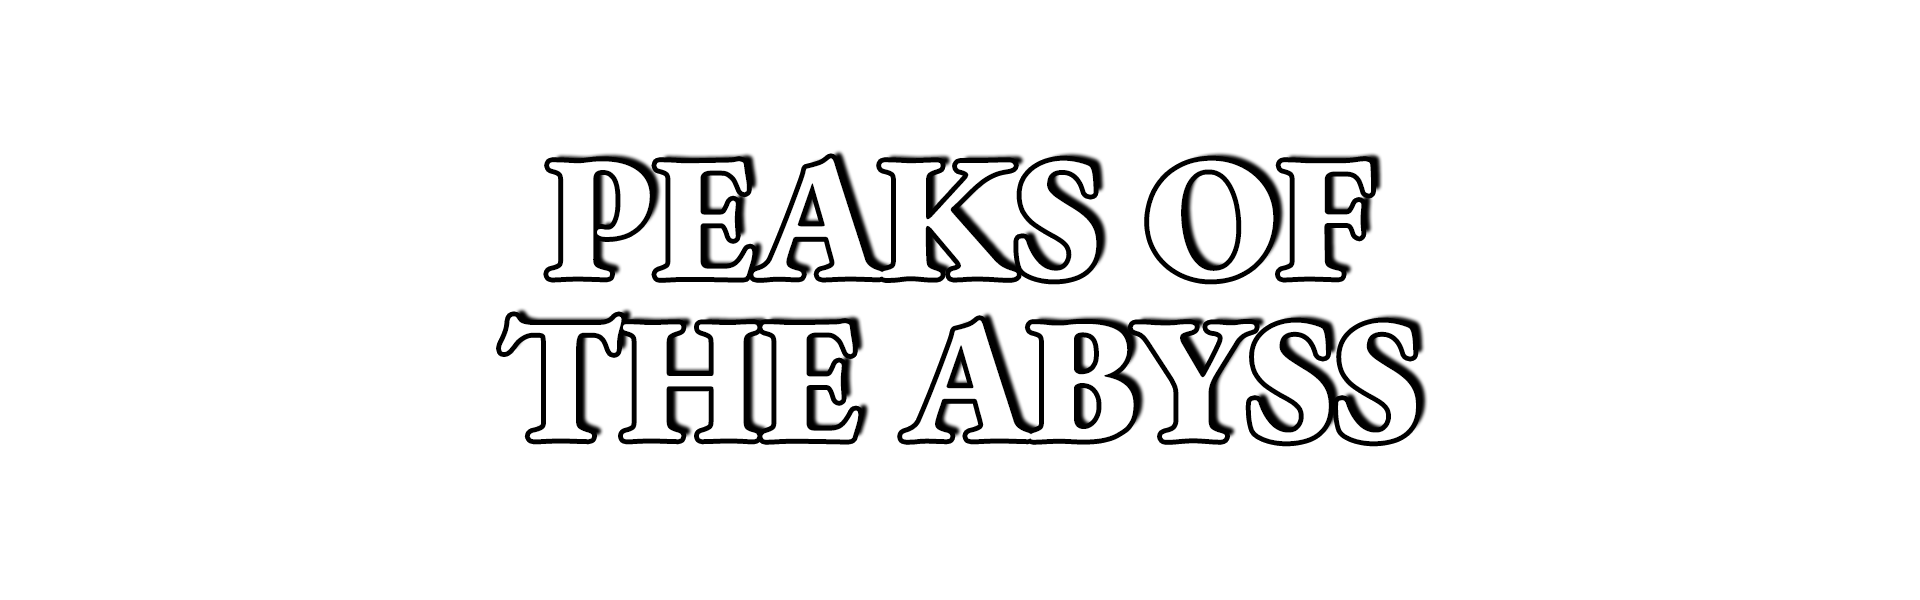 PEAKS OF THE ABYSS